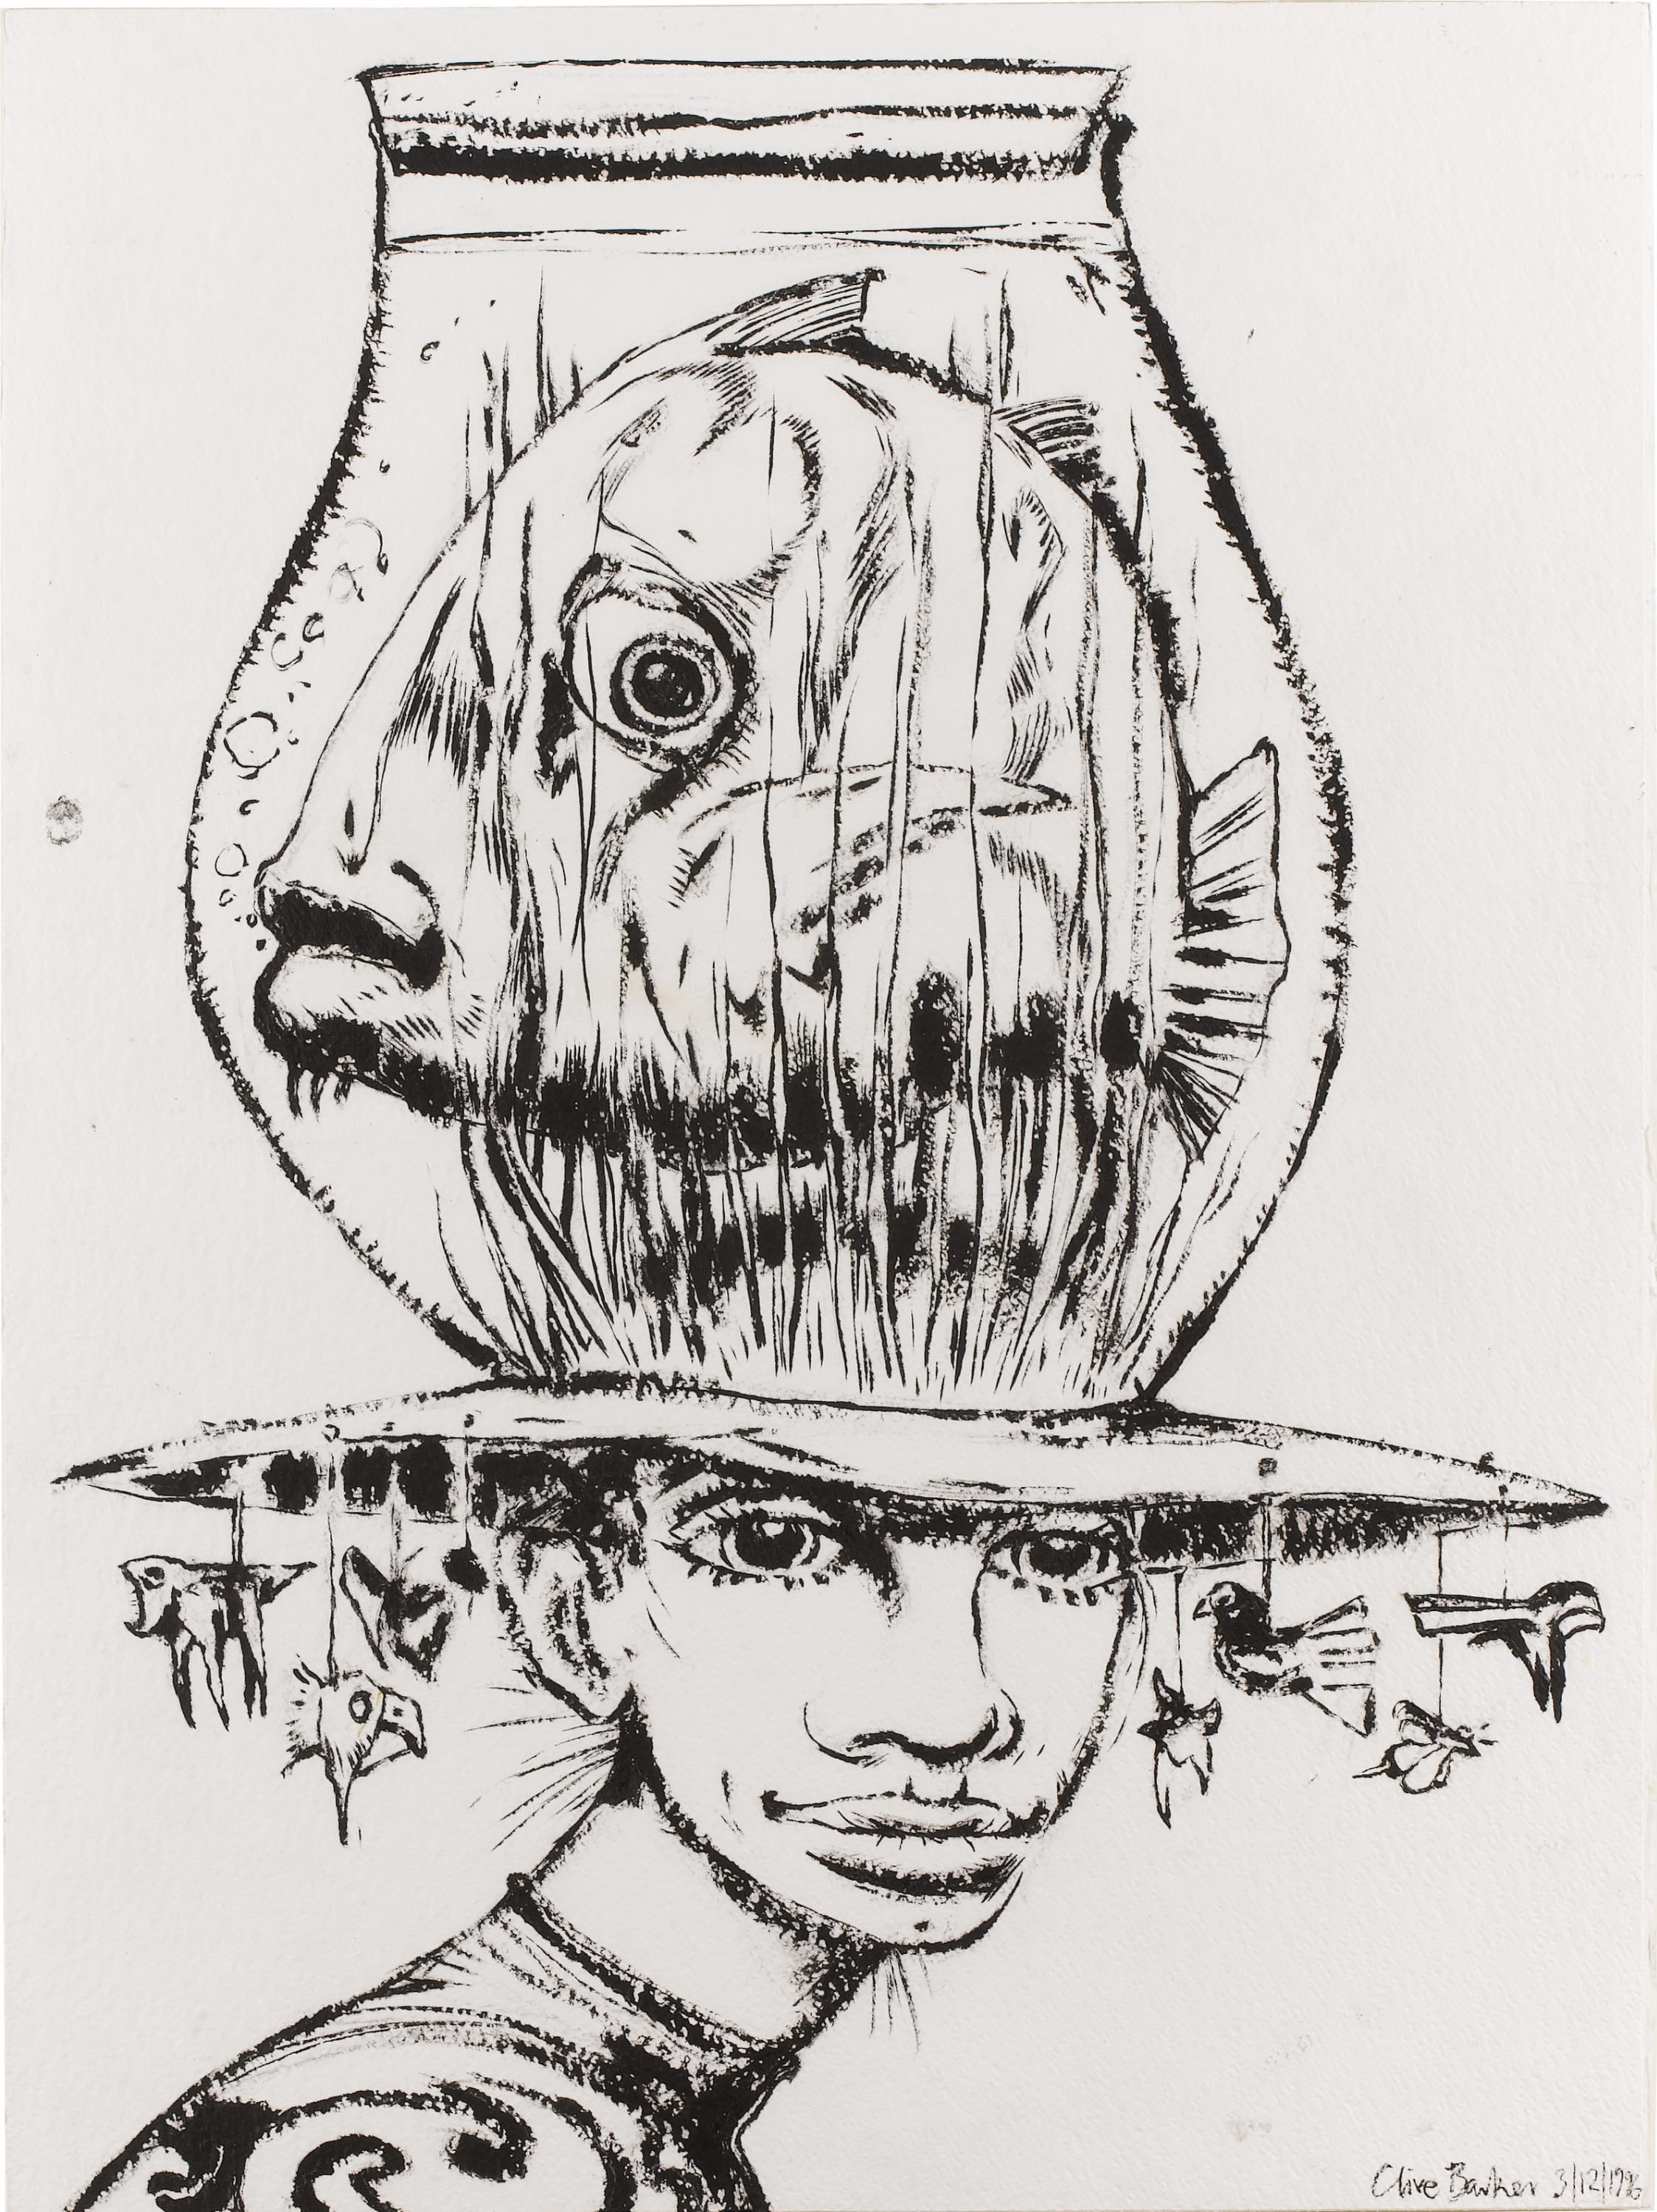 Artwork by Clive Barker, Woman With a Fish Bowl Head, original illustration, Made of ...